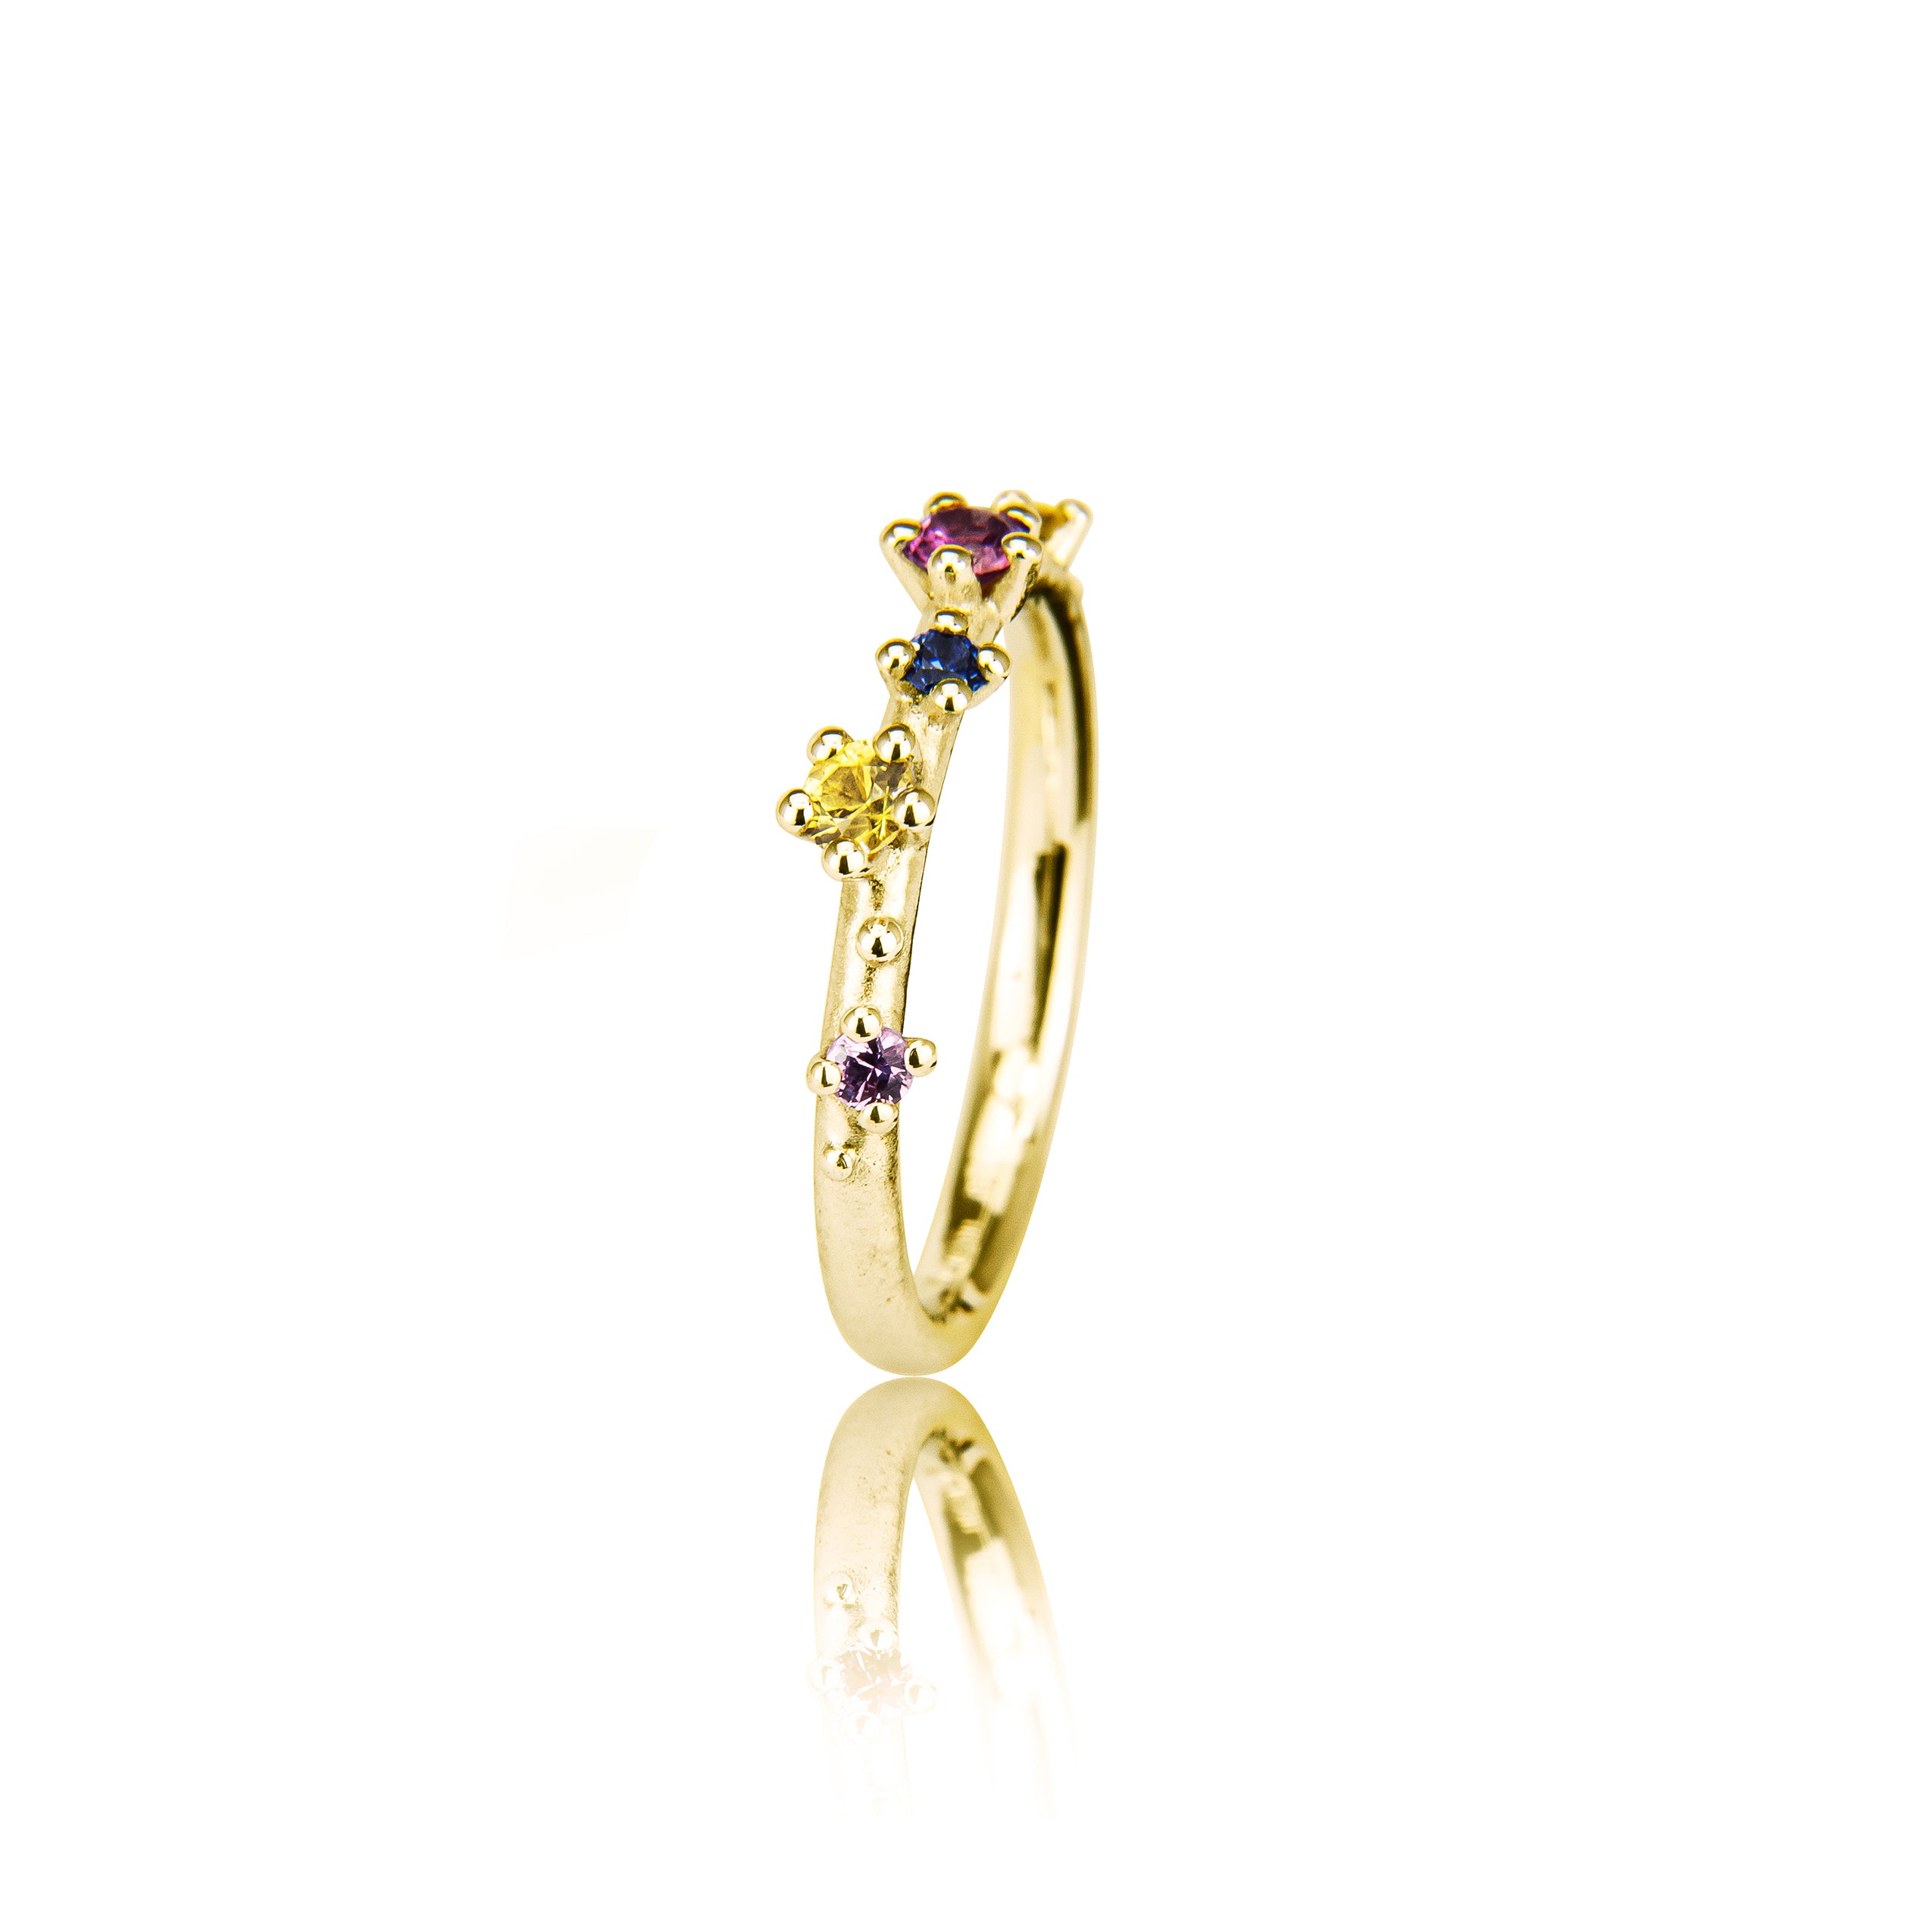 Shine ring "5" in gold with sapphires